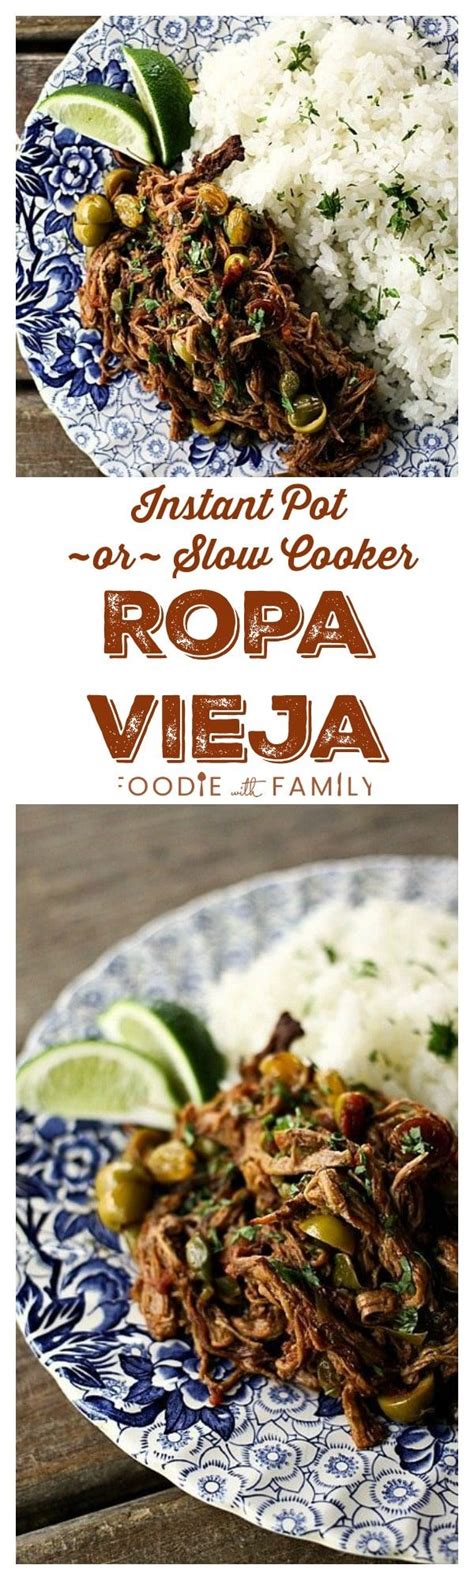 You can also make this recipe with skirt steak or flank steak. Ropa Vieja: Thin shreds of flank steak braised in a rich ...